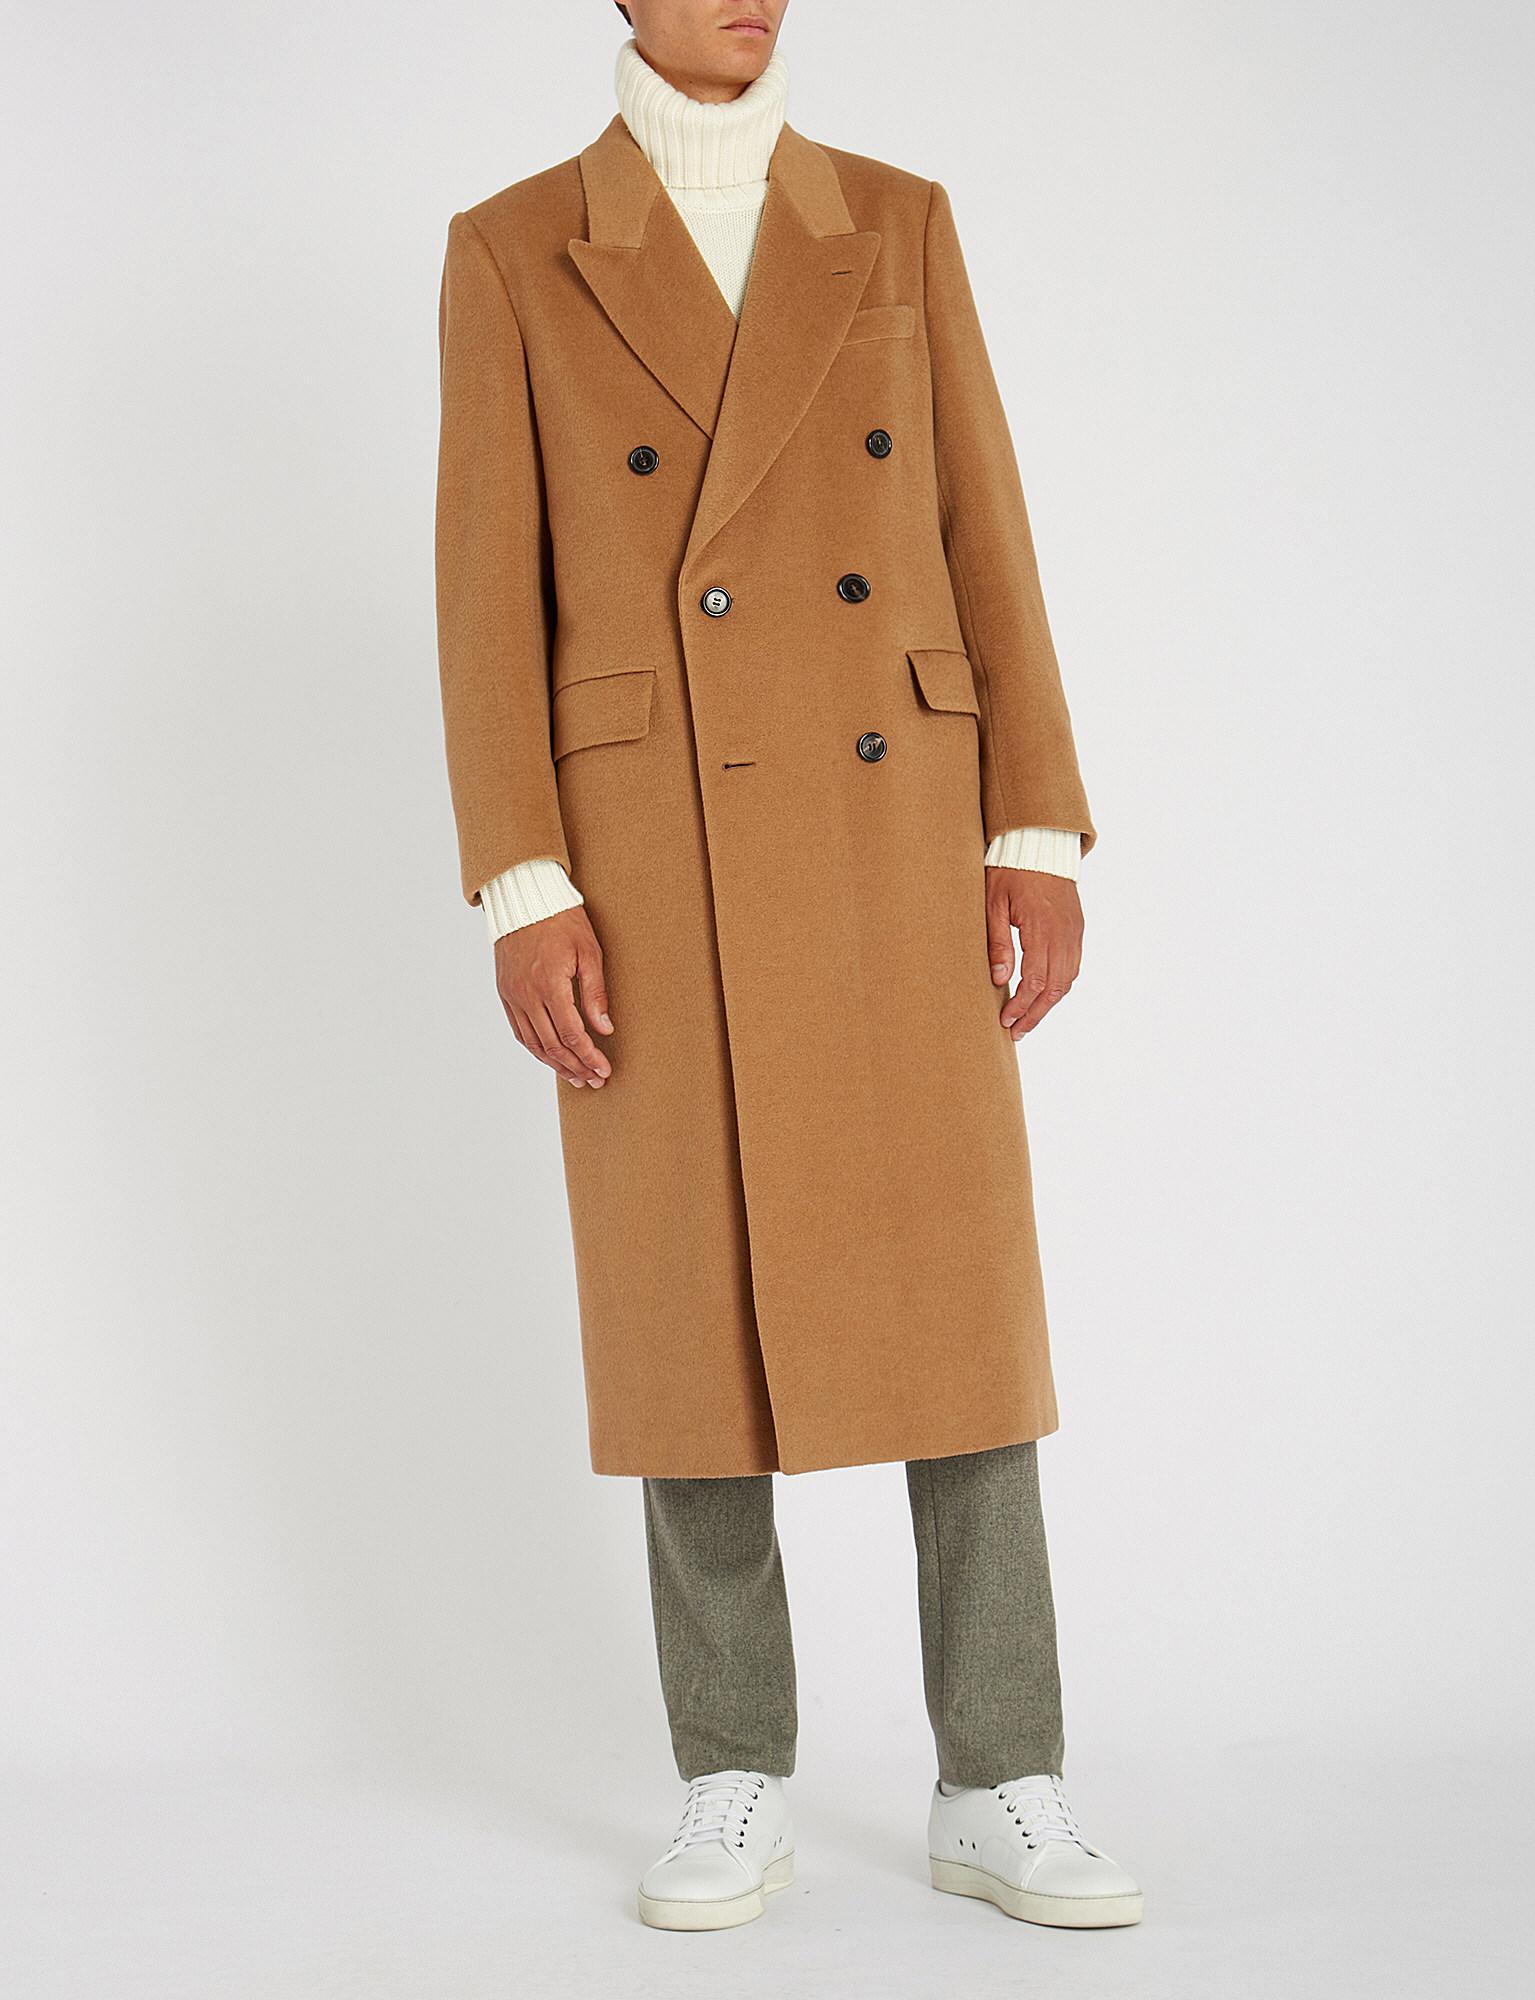 Brioni Double-breasted Camel-hair Coat in Natural for Men - Lyst